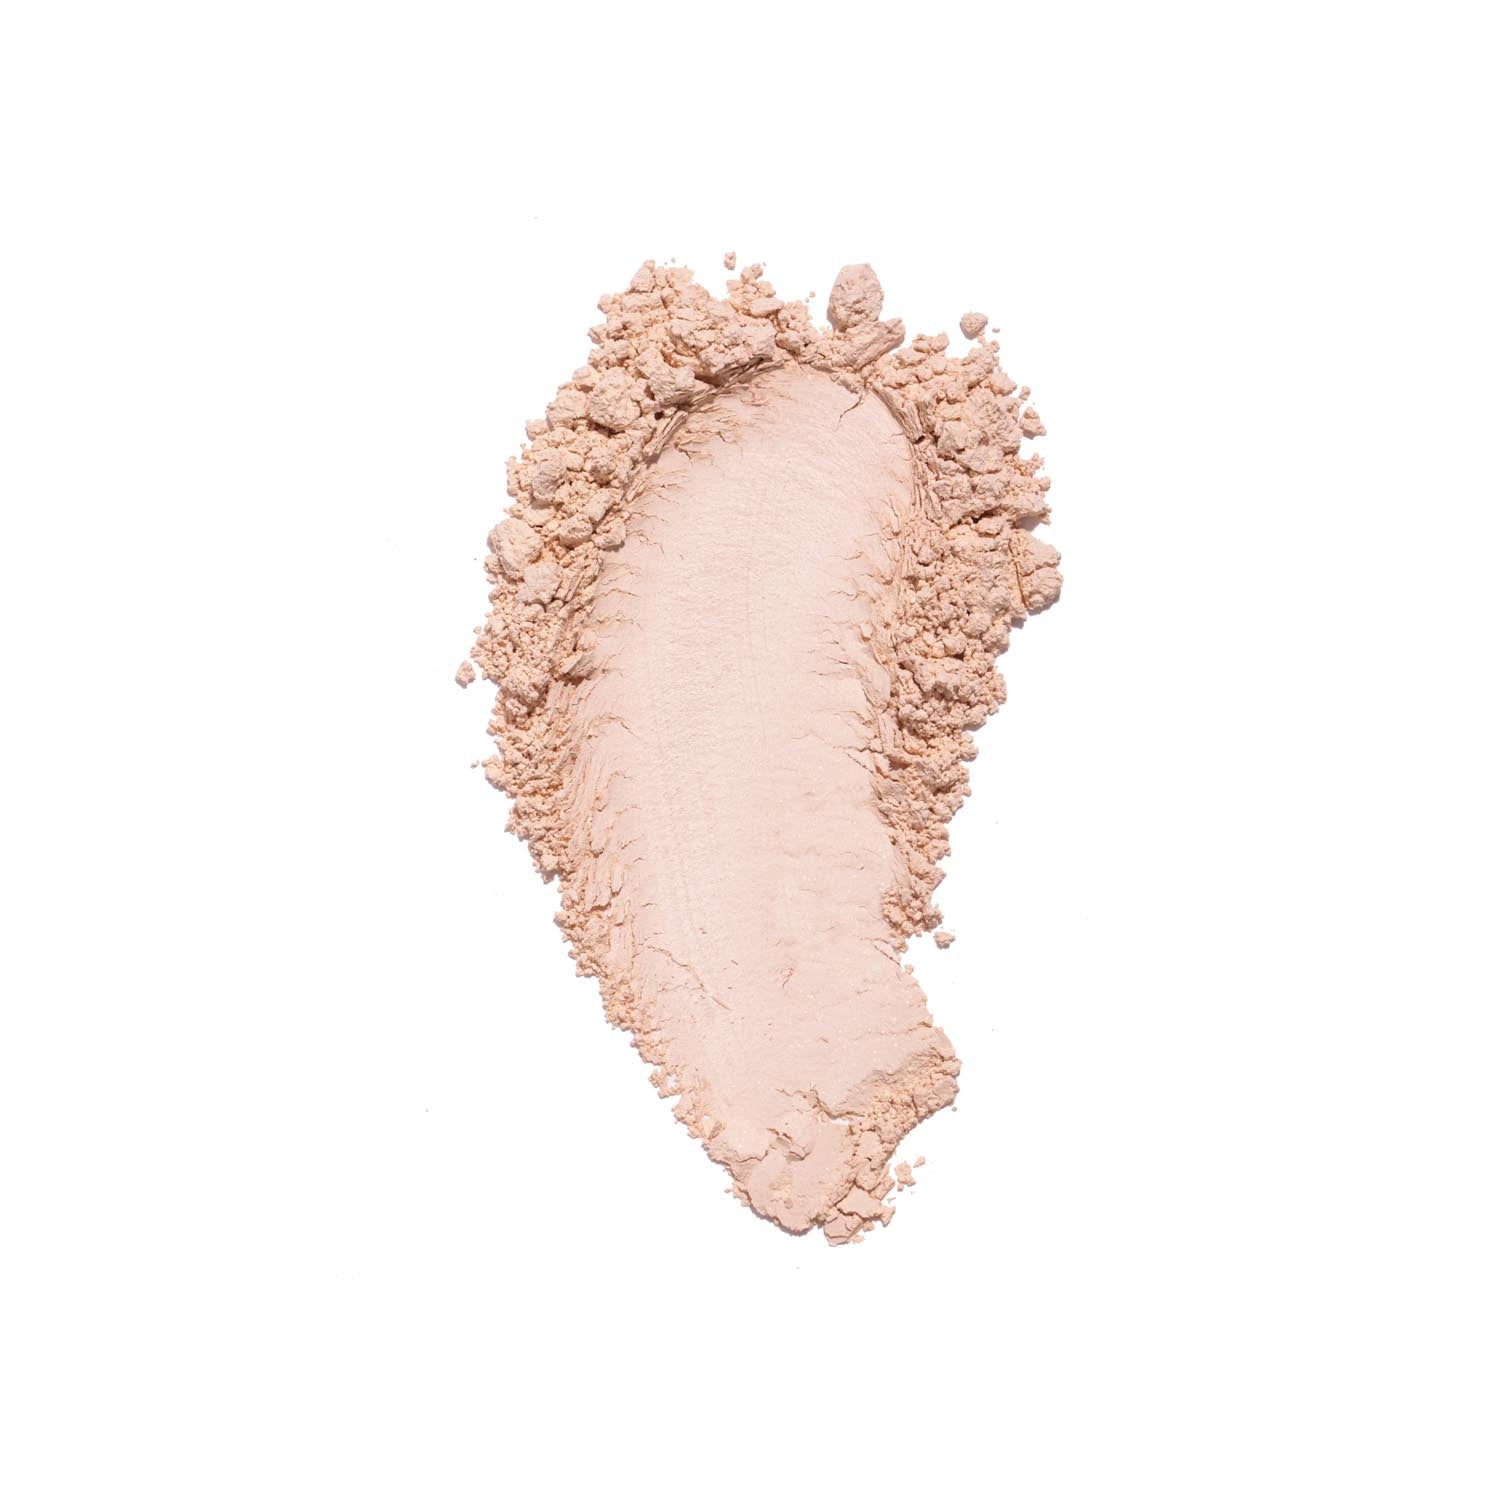 Bperfect BPerfect x Katie Daley - Perfect Powder 2 Shaws Department Stores